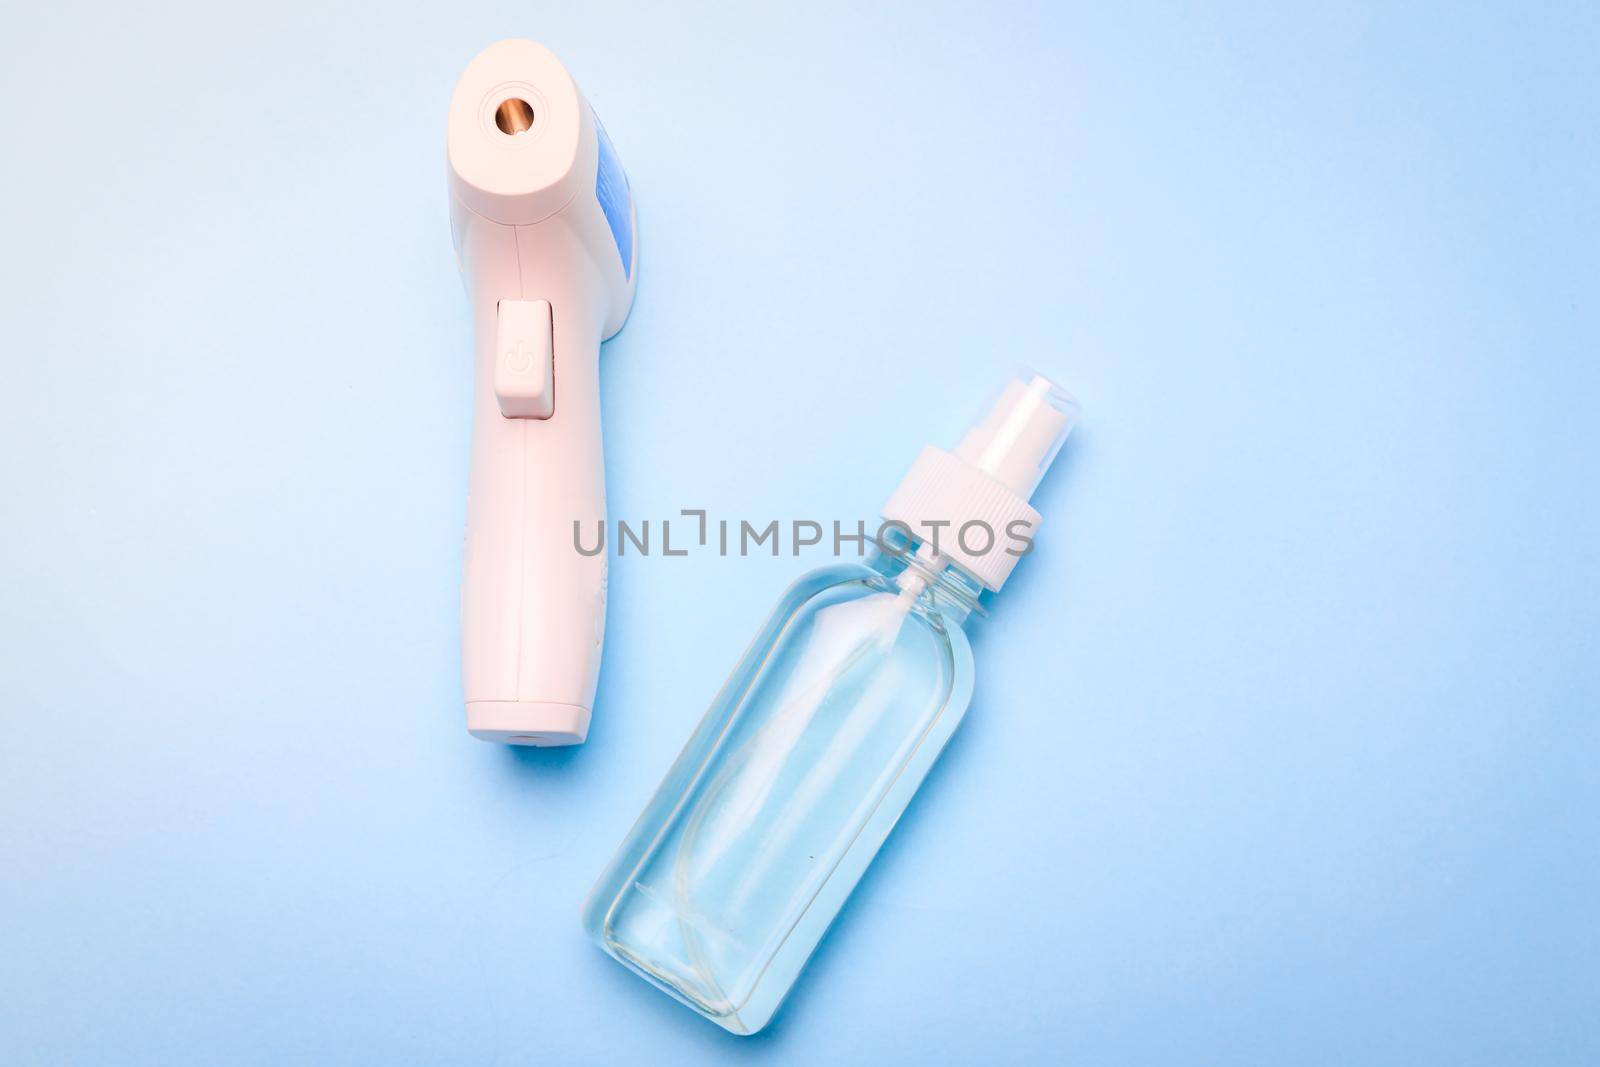 infrared thermometer and antiseptic on a blue background . antiseptic. treatment of hands. prevention. non-contact temperature measurement. health. coronavirus. pandemic. human health. check the temperature. copy space